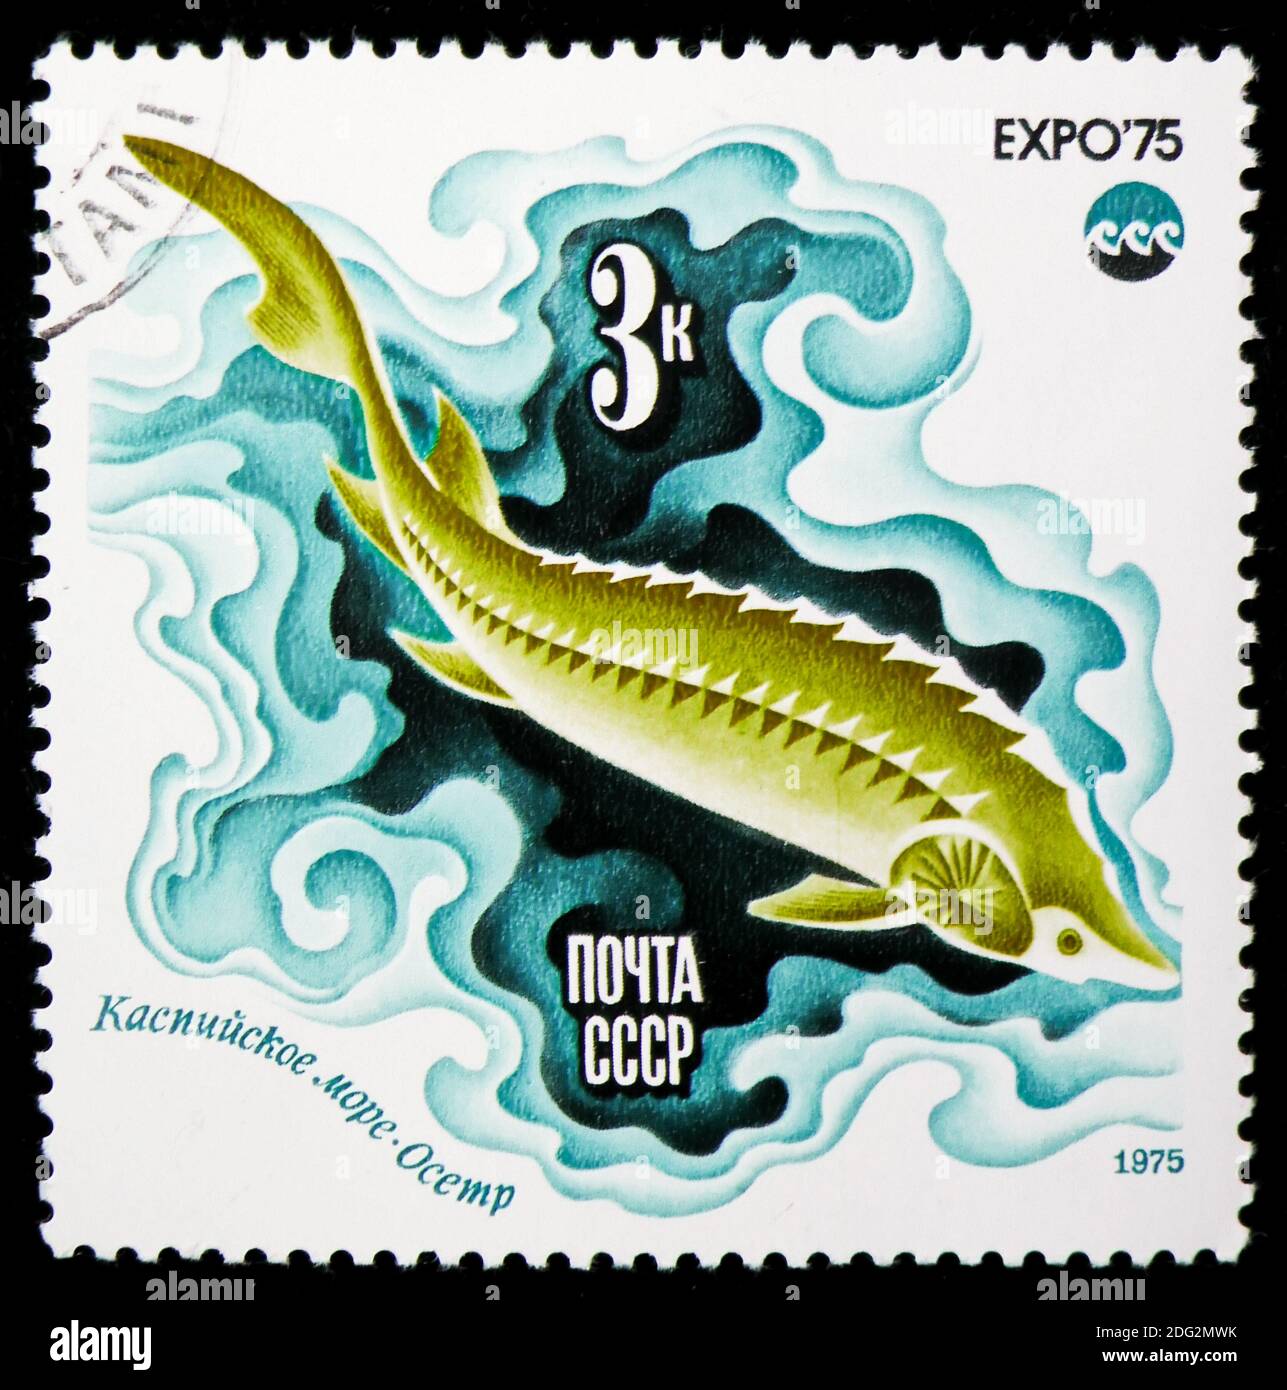 MOSCOW, RUSSIA - NOVEMBER 10, 2018: A stamp printed in USSR (Russia) shows Russian Sturgeon (Acipenser gueldenstaedti), Expo 75 serie, circa 1975 Stock Photo